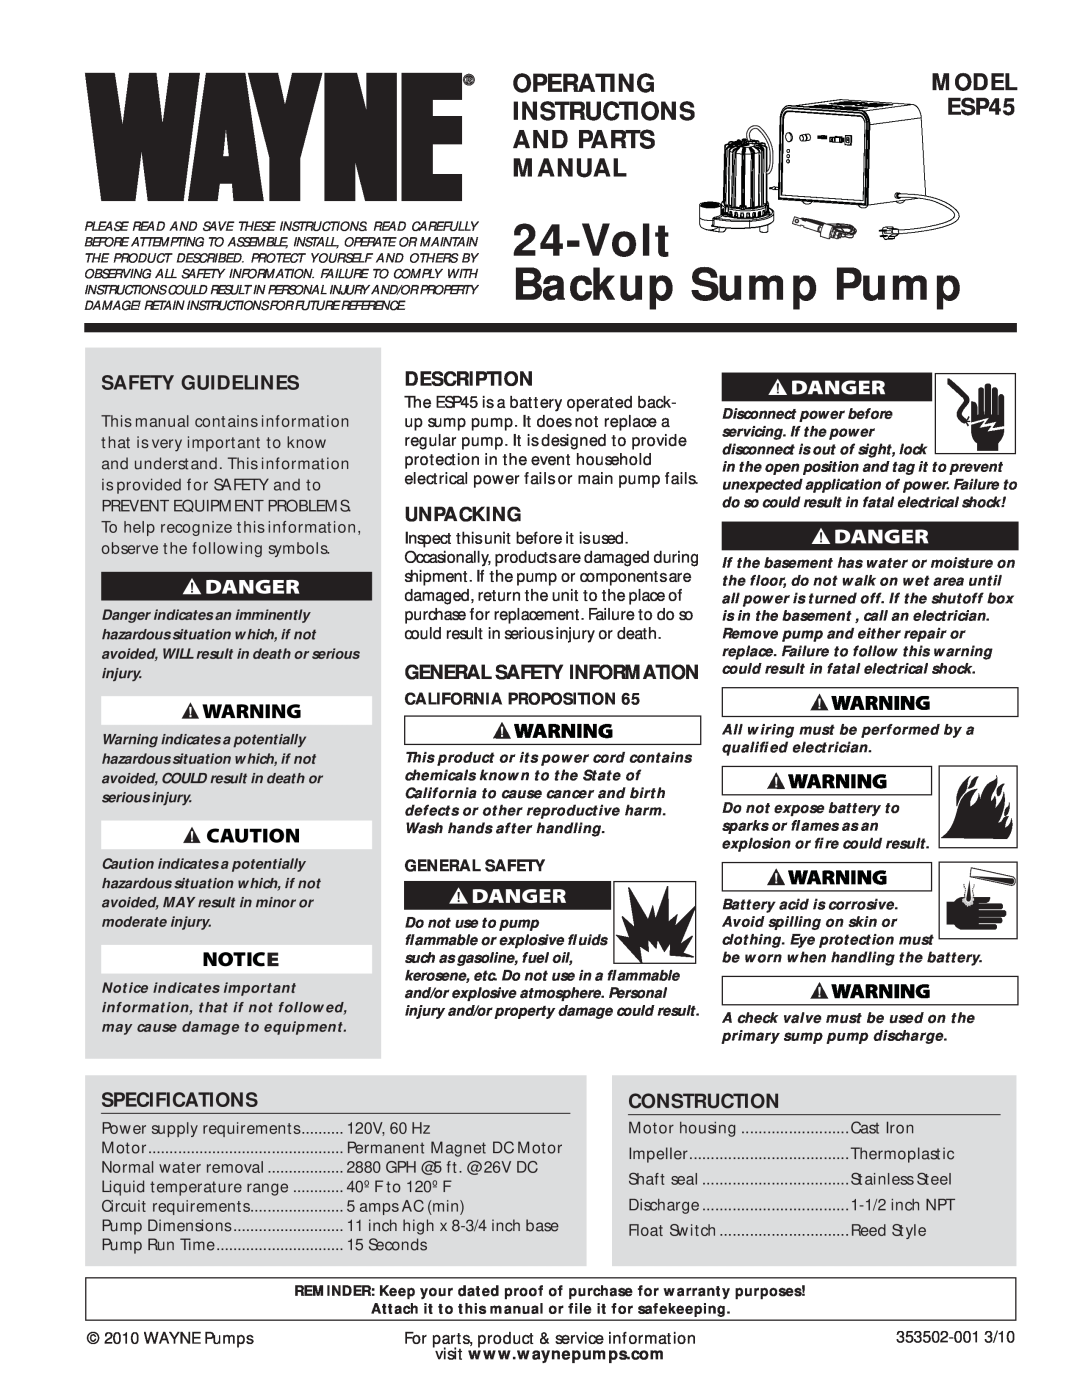 Wayne ESP45 specifications Description, Unpacking, Safety Guidelines, General Safety Information, Attach Your Receipt Here 